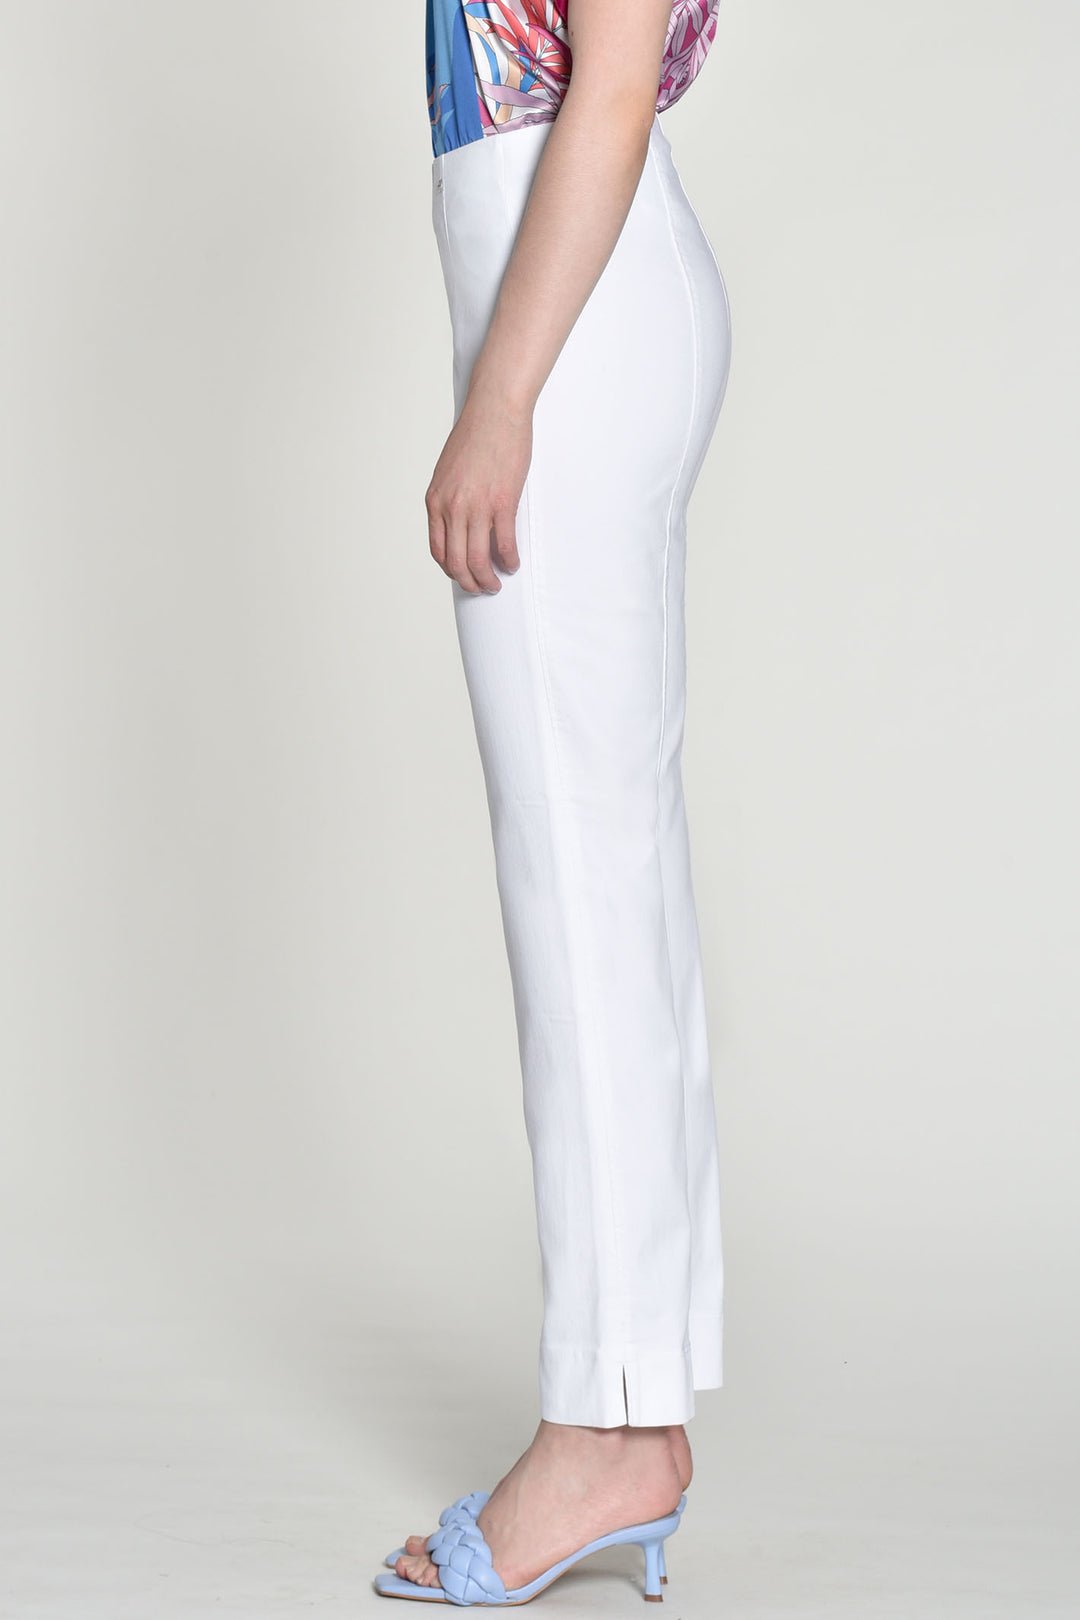 Robell 51639 5448 10 Marie White Trousers 78cm - Experience Boutique